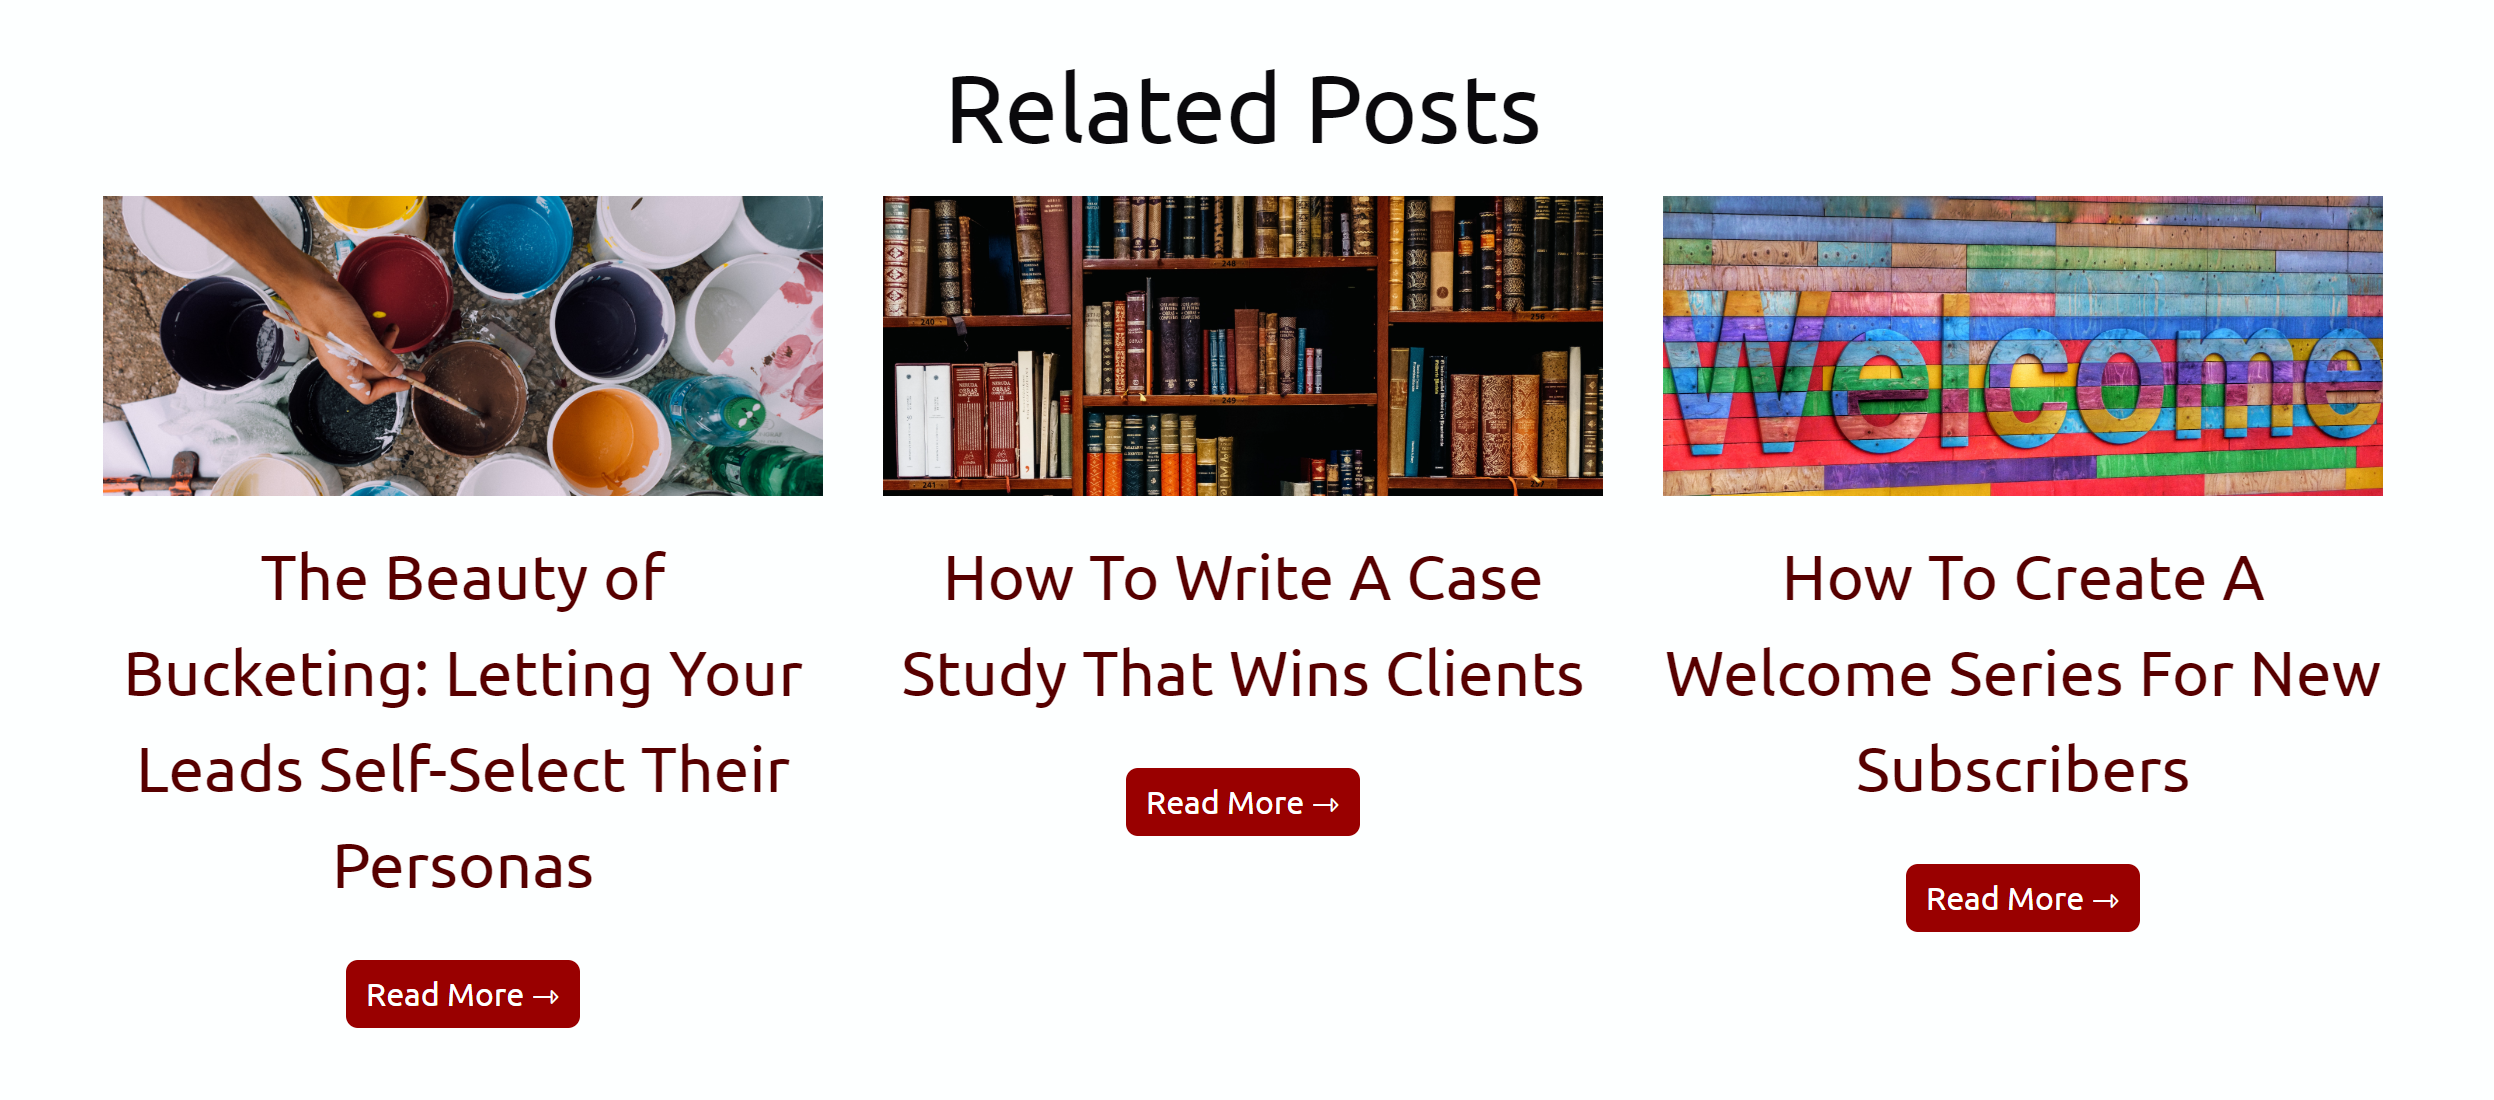 How to Add Related Posts to Your HubSpot Blog